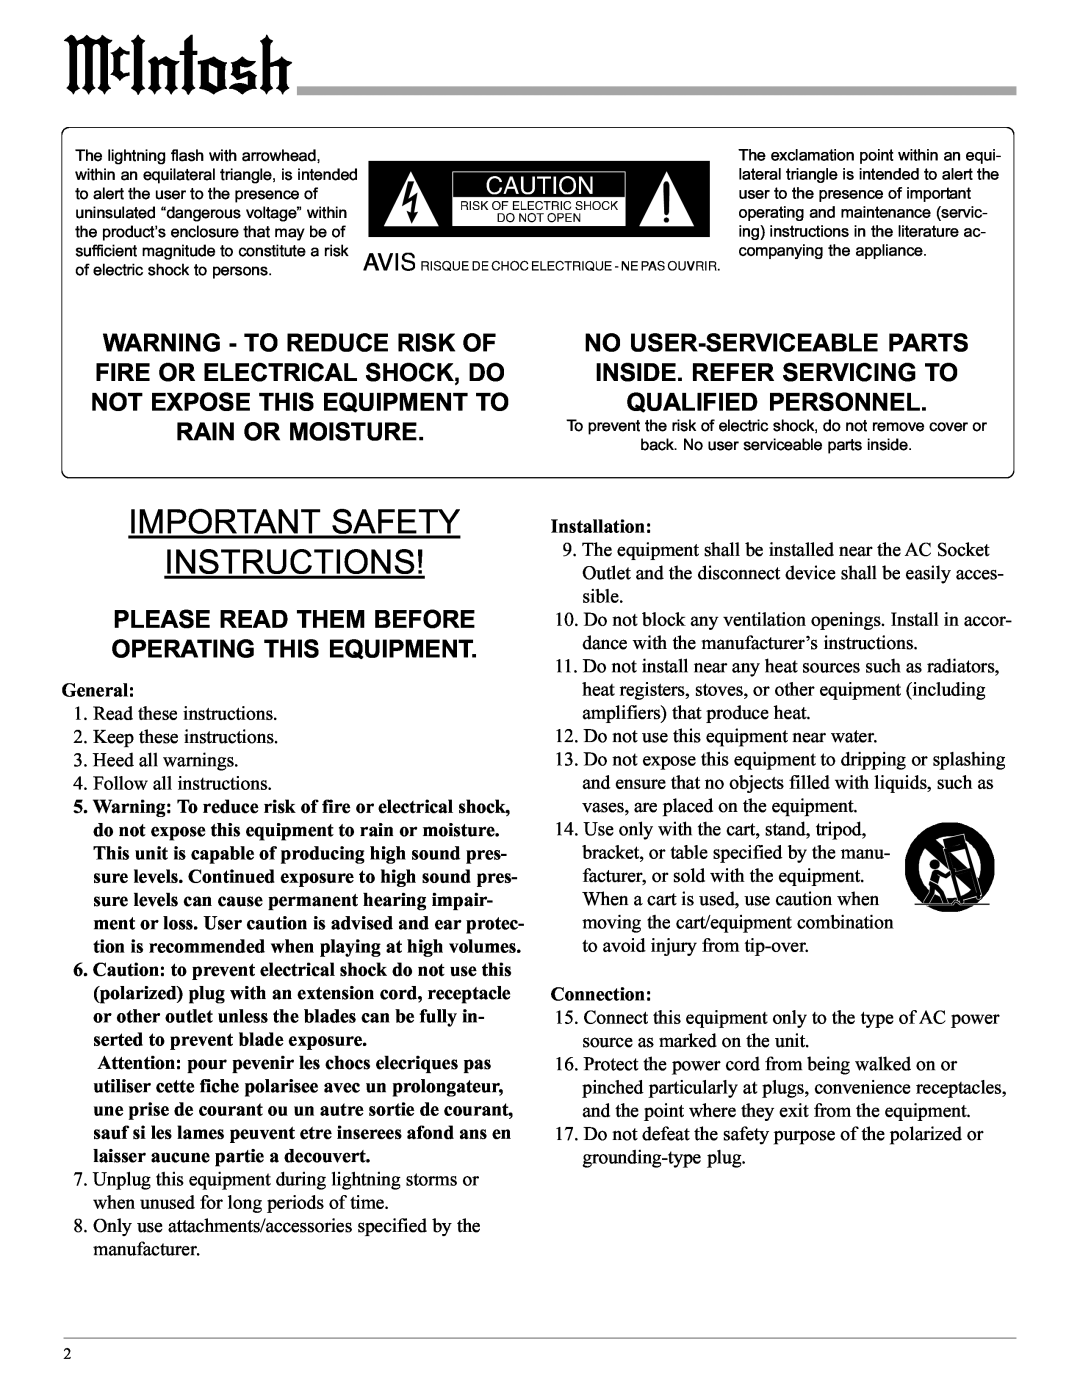 McIntosh C200 manual Important Safety Instructions, Please Read Them Before Operating This Equipment 